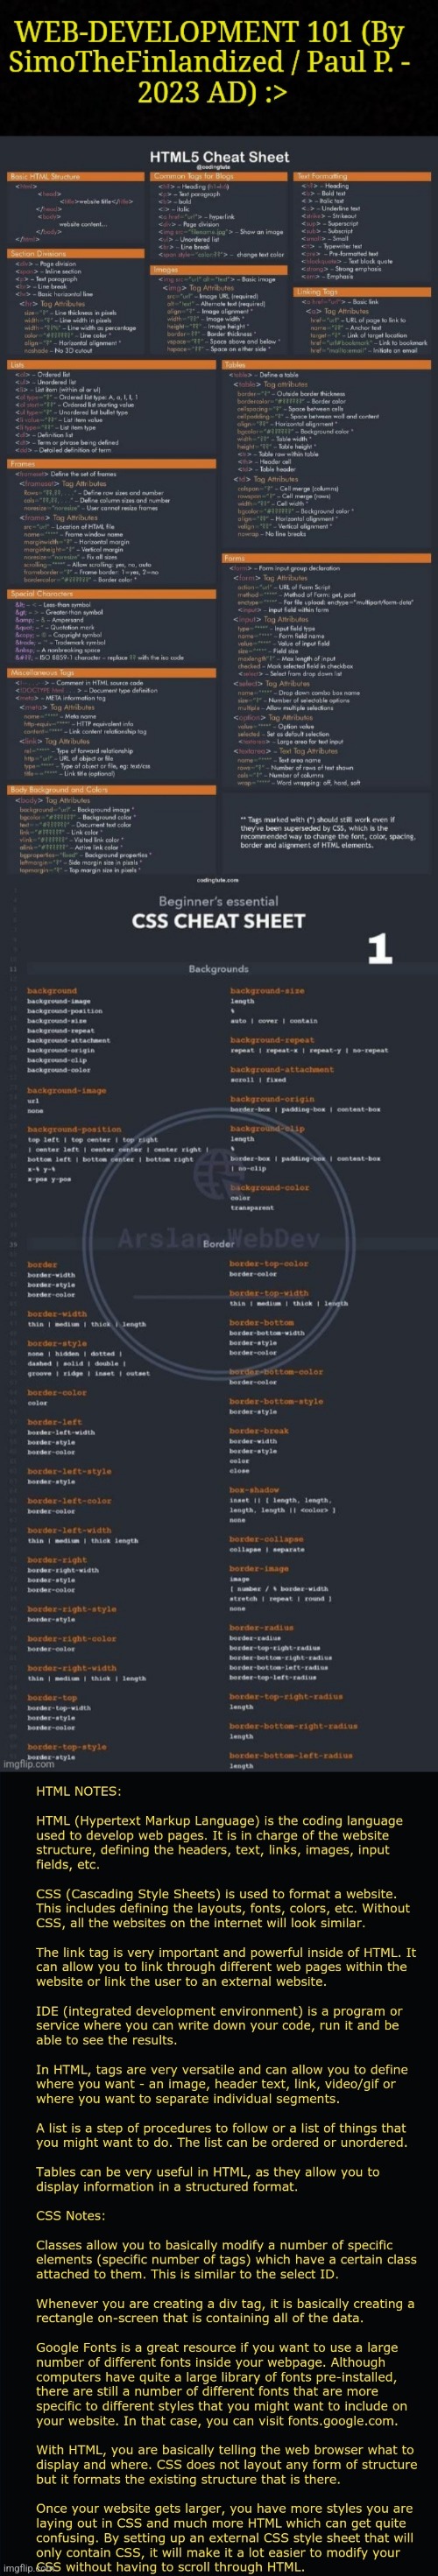 WEB-DEVELOPMENT 101 (Updated 2024 AD) - By SimoTheFinlandized :> | image tagged in simothefinlandized,web development,tutorial,infographics | made w/ Imgflip meme maker